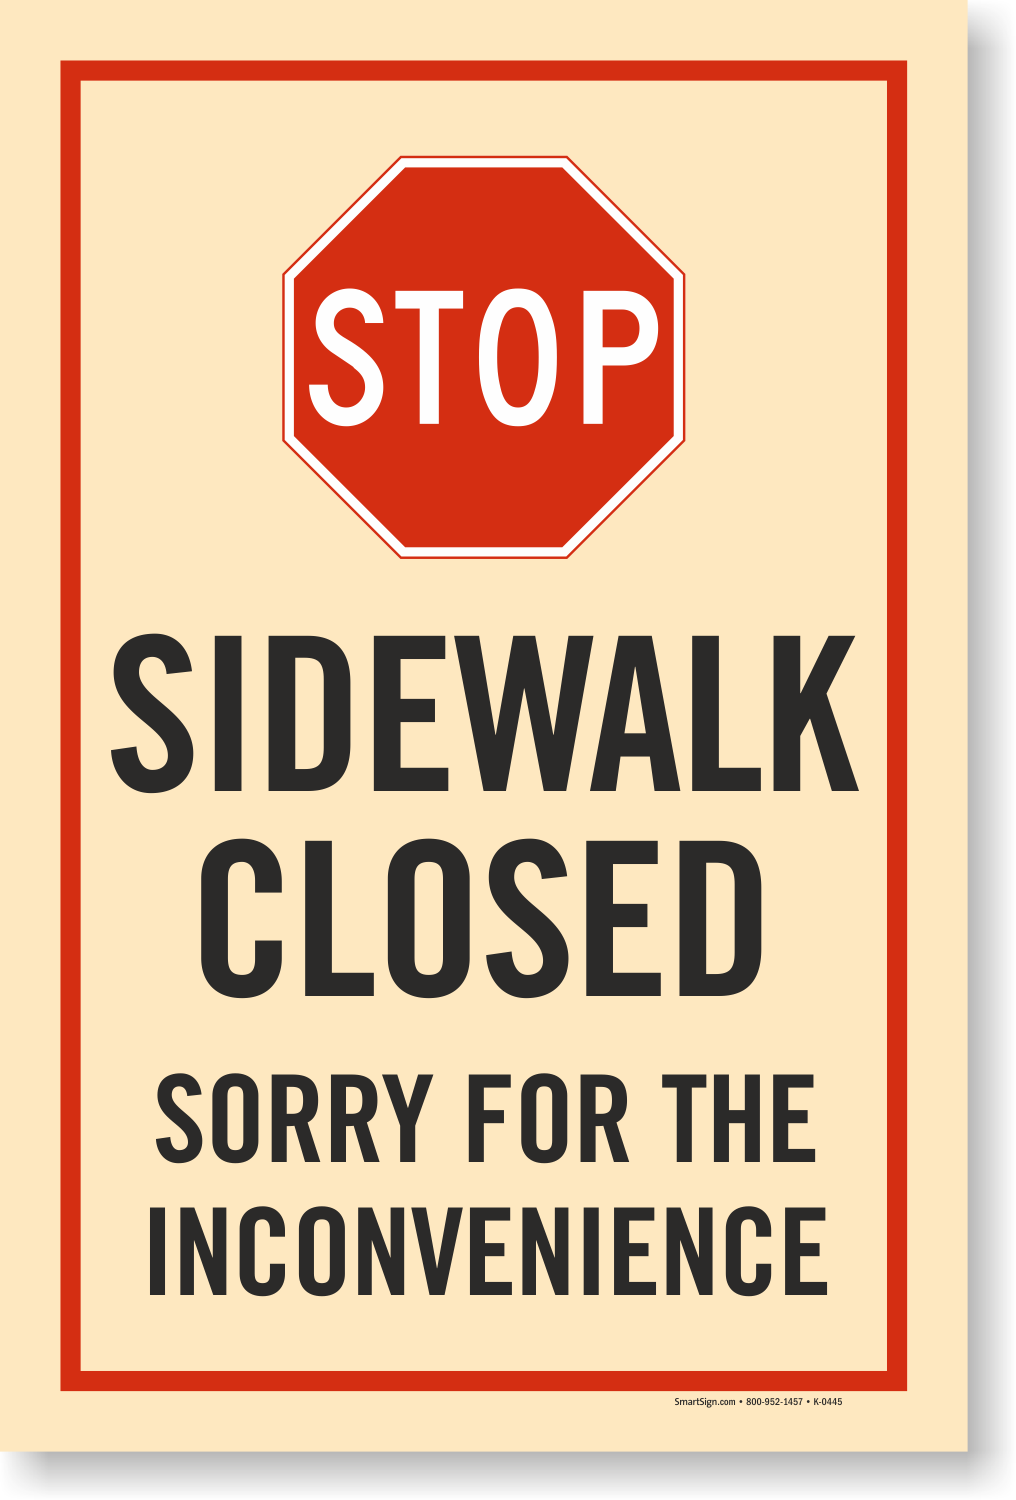 Sidewalk Closed Sorry For Inconvenience Sign Kit Insert ...